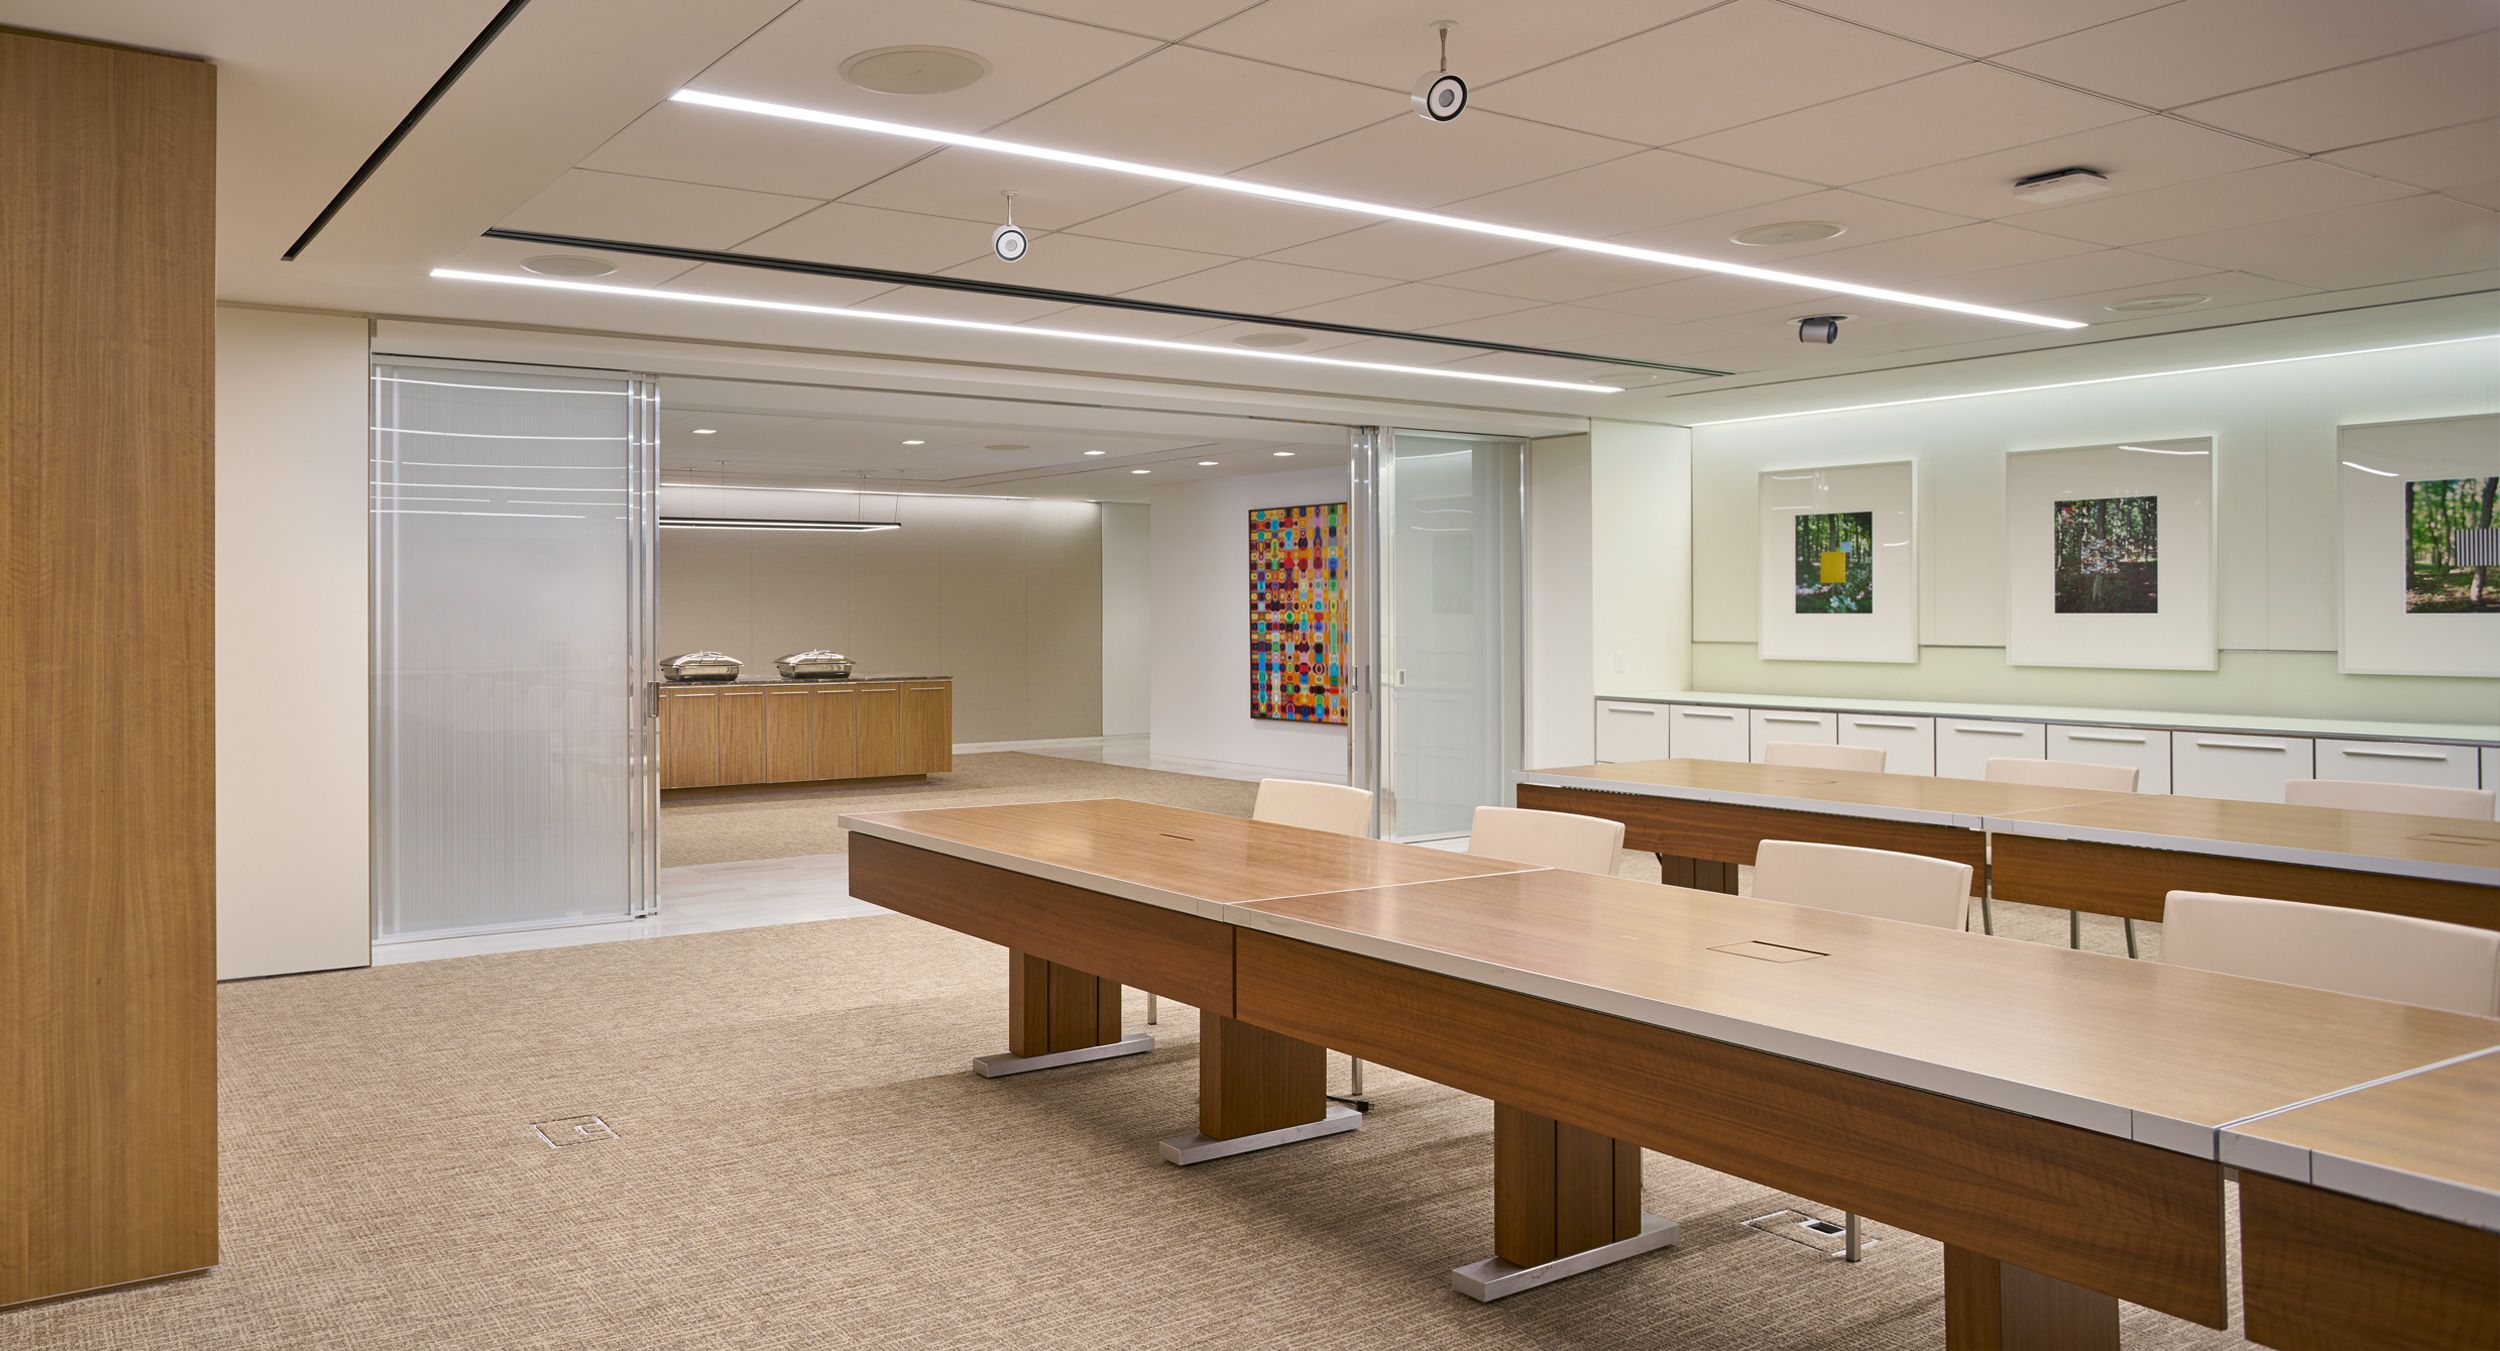 MOTUS tables are reconfigured daily to meet ever-changing needs. 